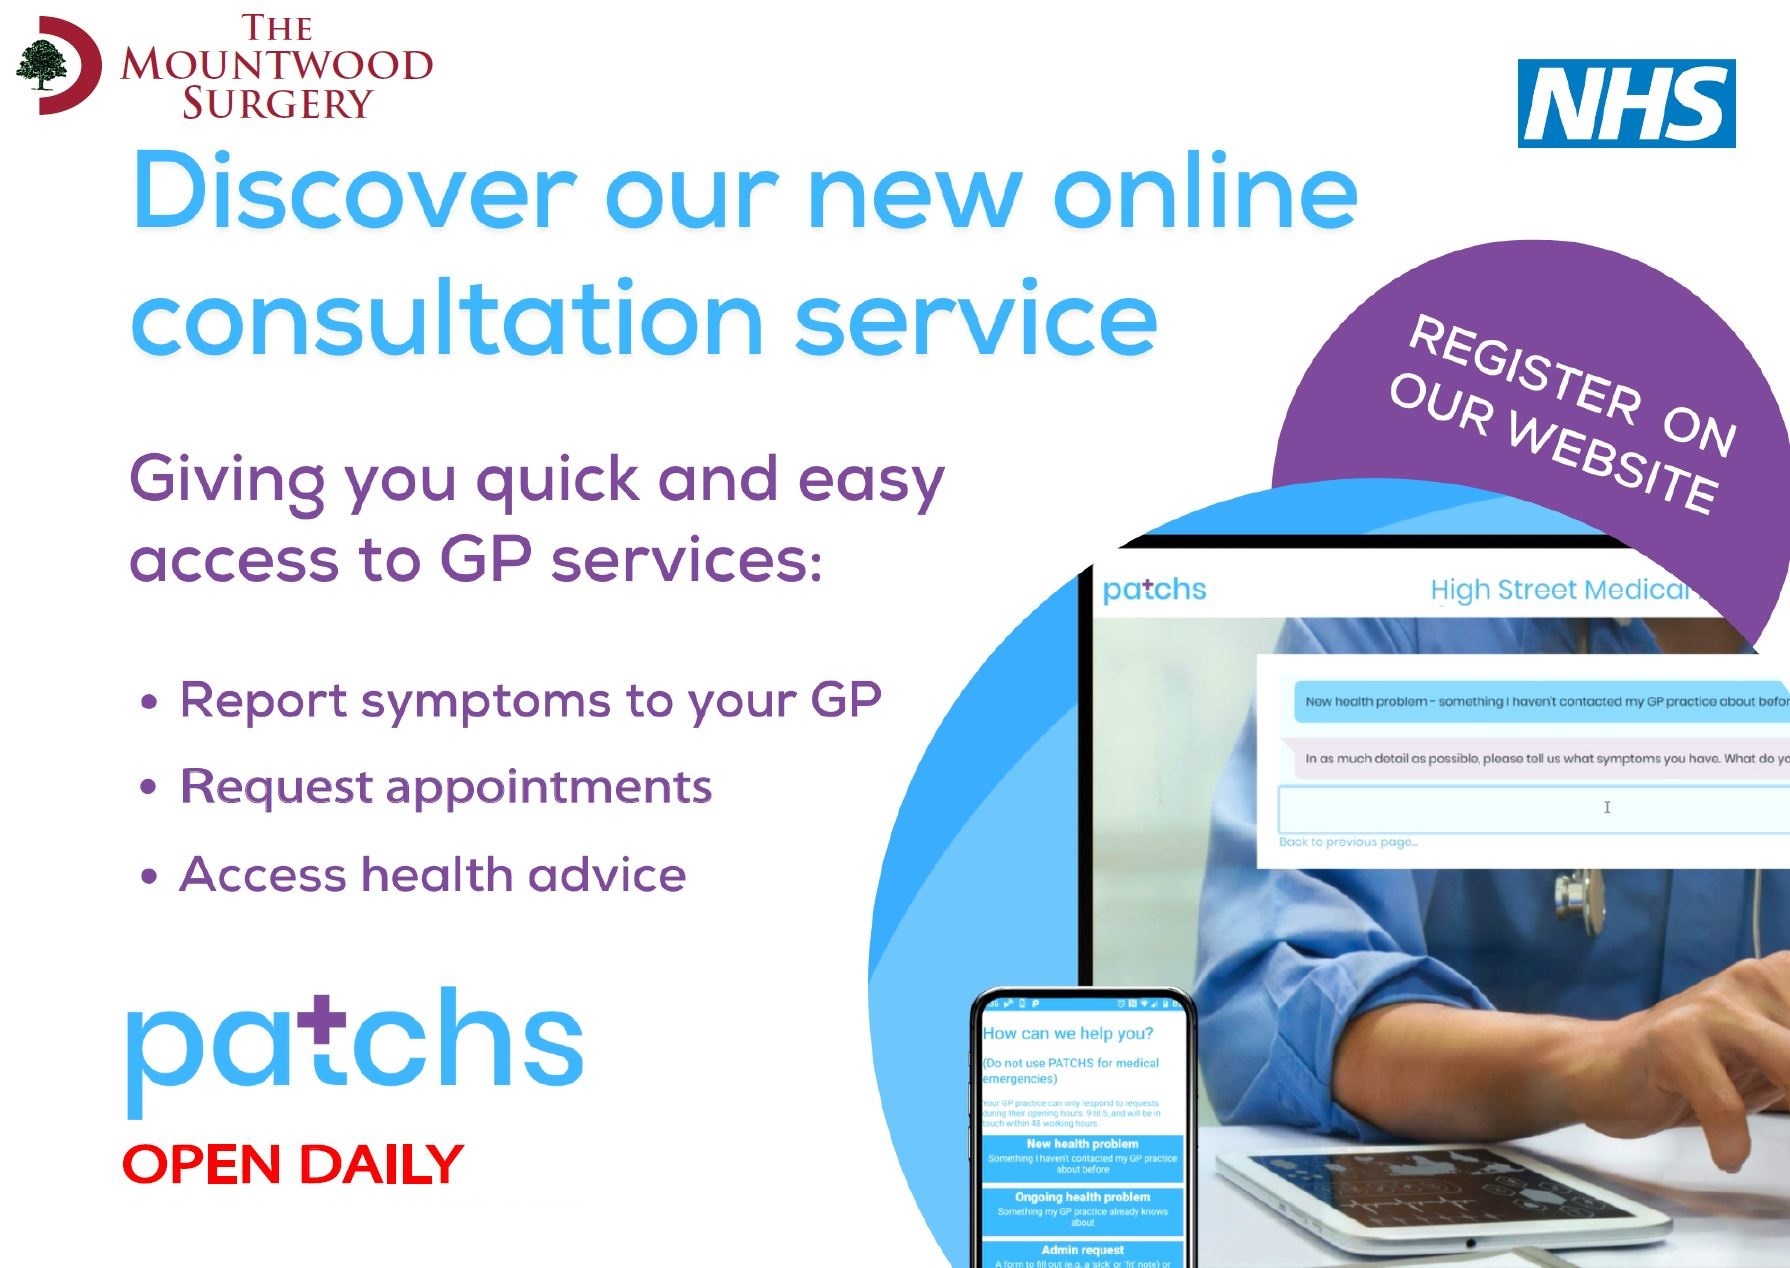 Information about PATCHS being available daily, allowing them to contact their GP, request appointments and access health advice, and asking patients to register today